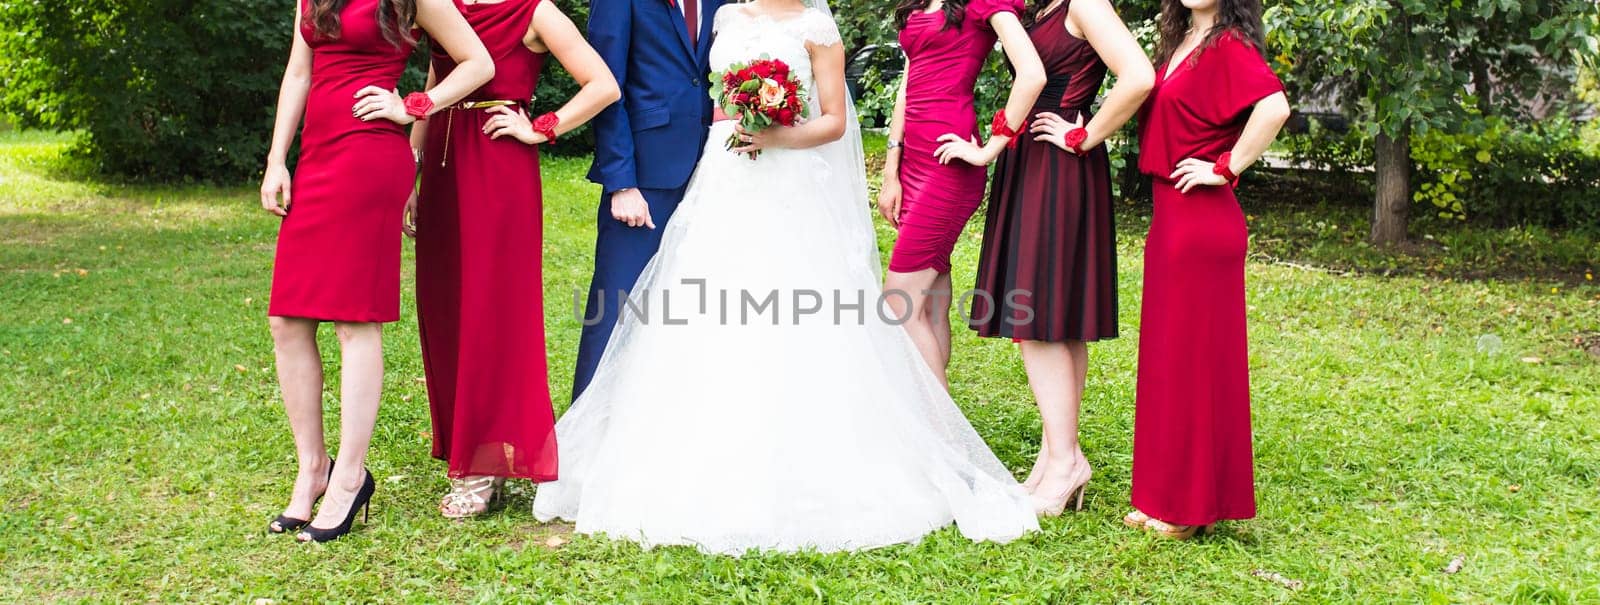 bridesmaids outdoors on the wedding day by Satura86